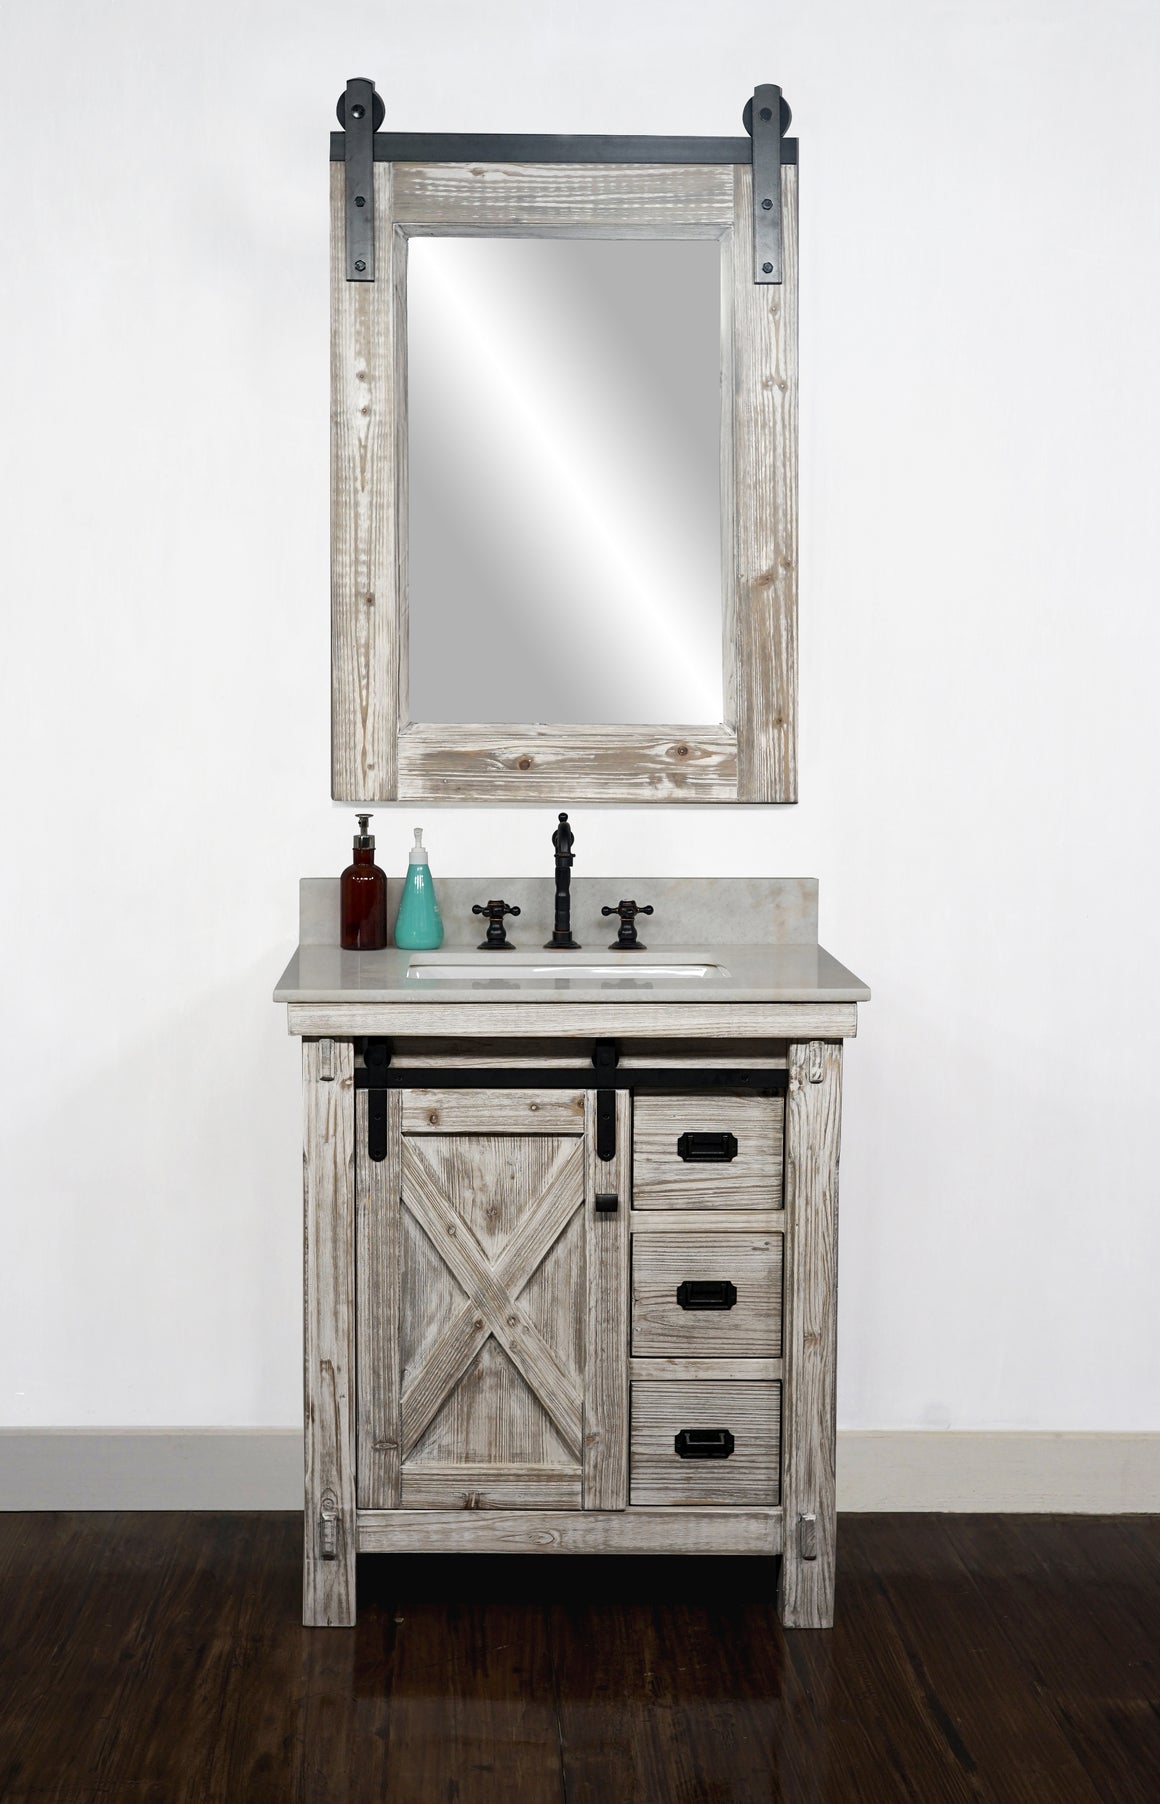 30"RUSTIC SOLID FIR BARN DOOR STYLE SINGLE SINK VANITY IN WHITE WASH WITH ARCTIC PEARL  QUARTZ MARBLE TOP-NO FAUCET